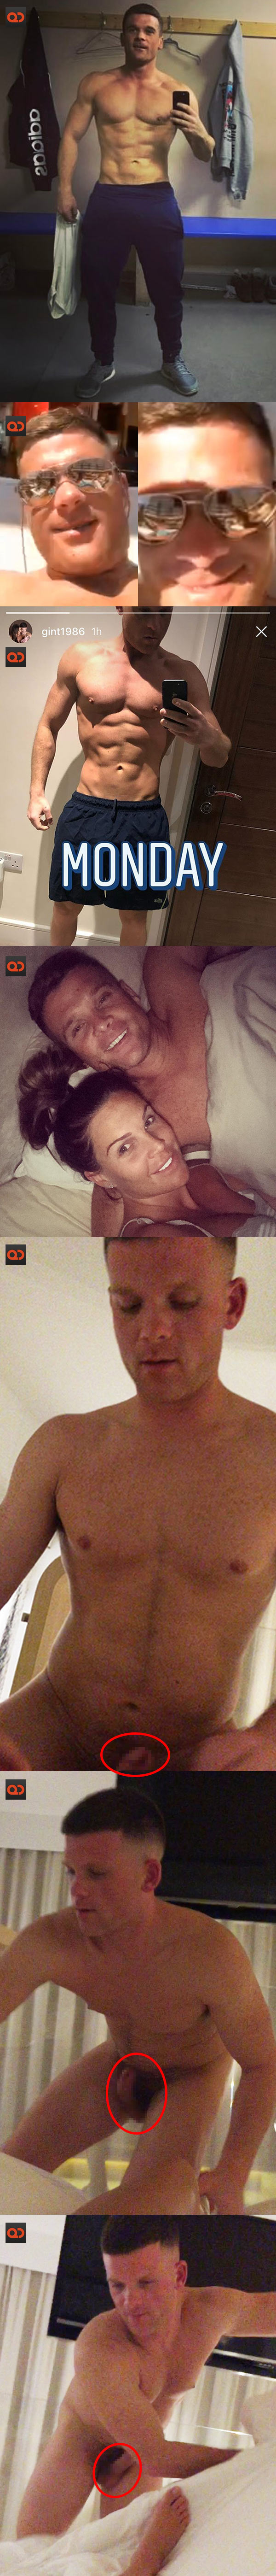 Michael O'Neill, Big Brother Star Danielle Lloyd's BF, Totally Naked And Hard In Leaked Sex Tape!